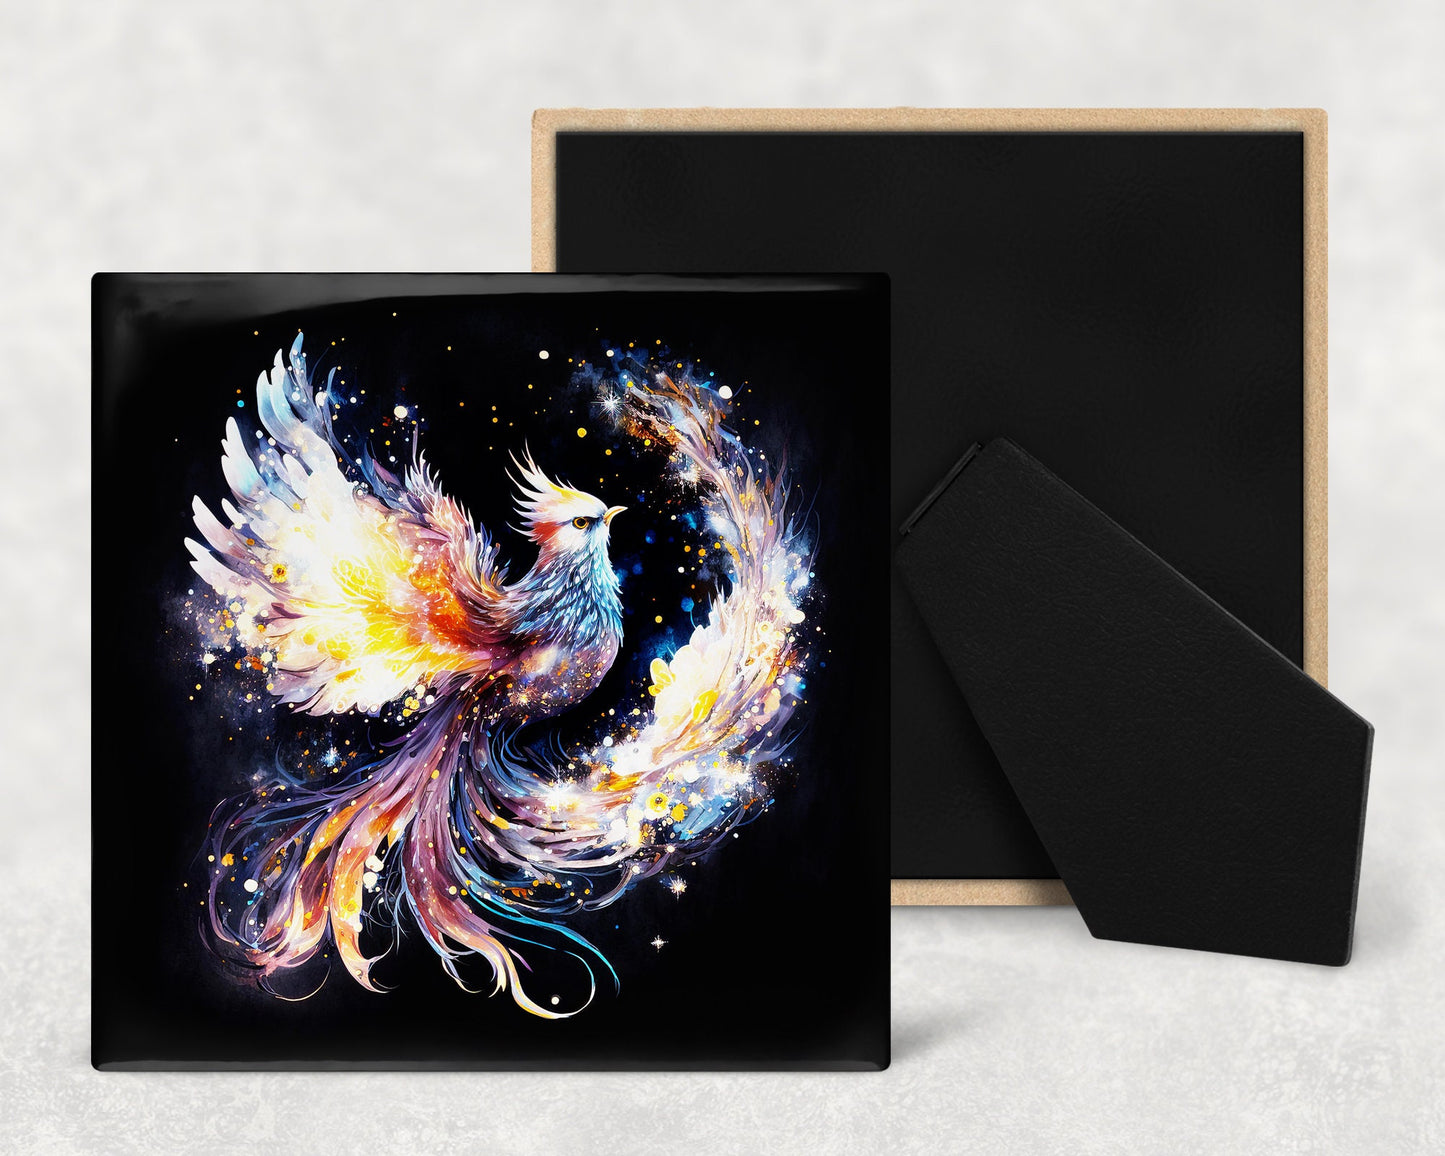 Phoenix Art Decorative Ceramic Tile Set with Optional Easel Back - Available in 4 sizes - Set of 4